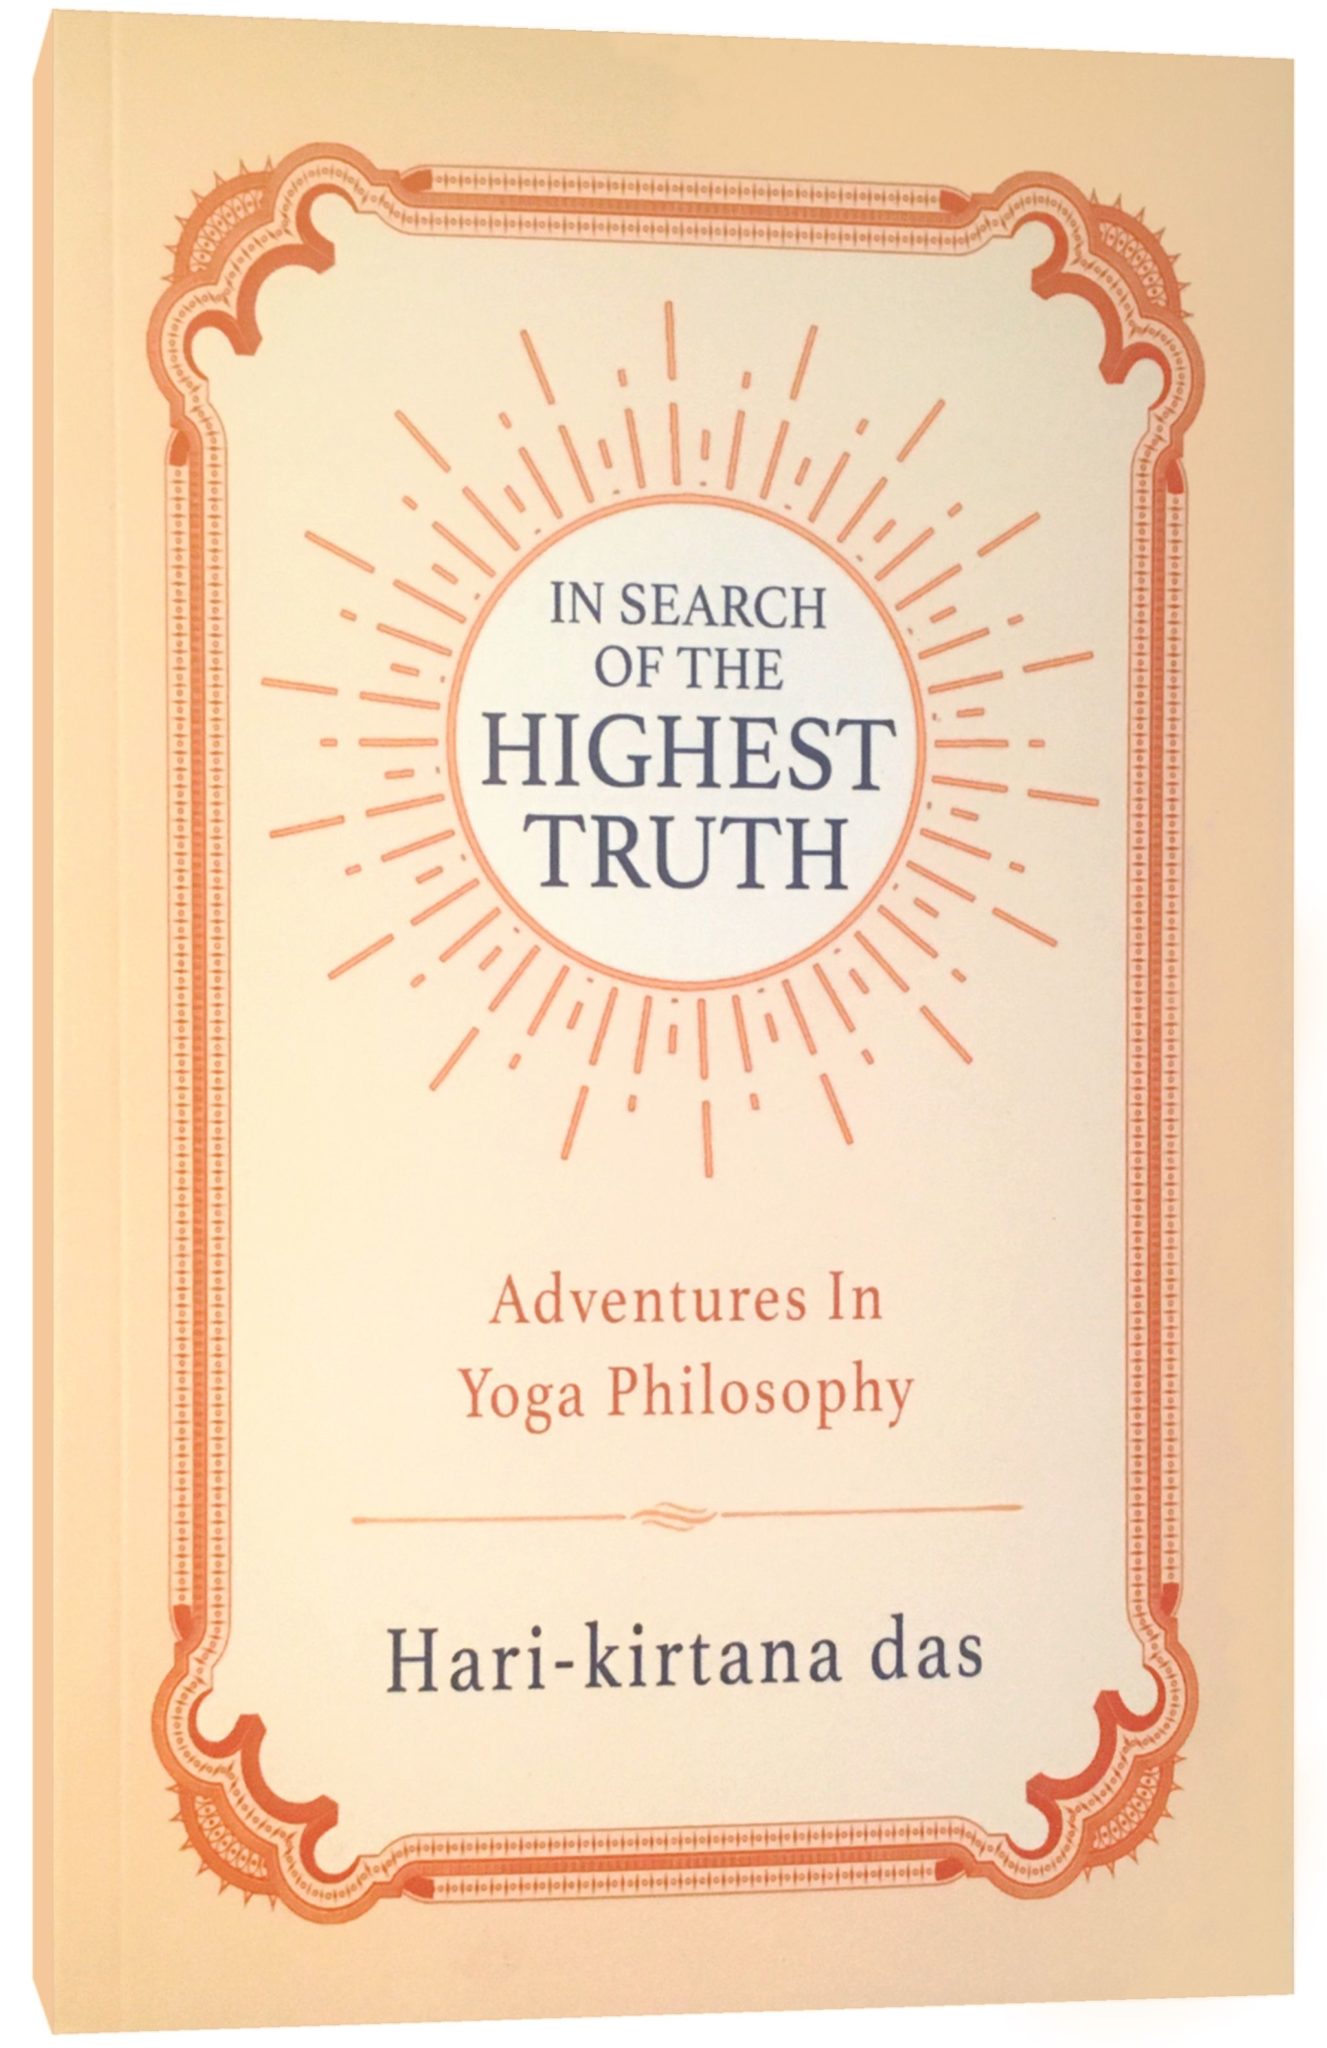 In Search of the Highest Truth by Hari-kirtana das book cover